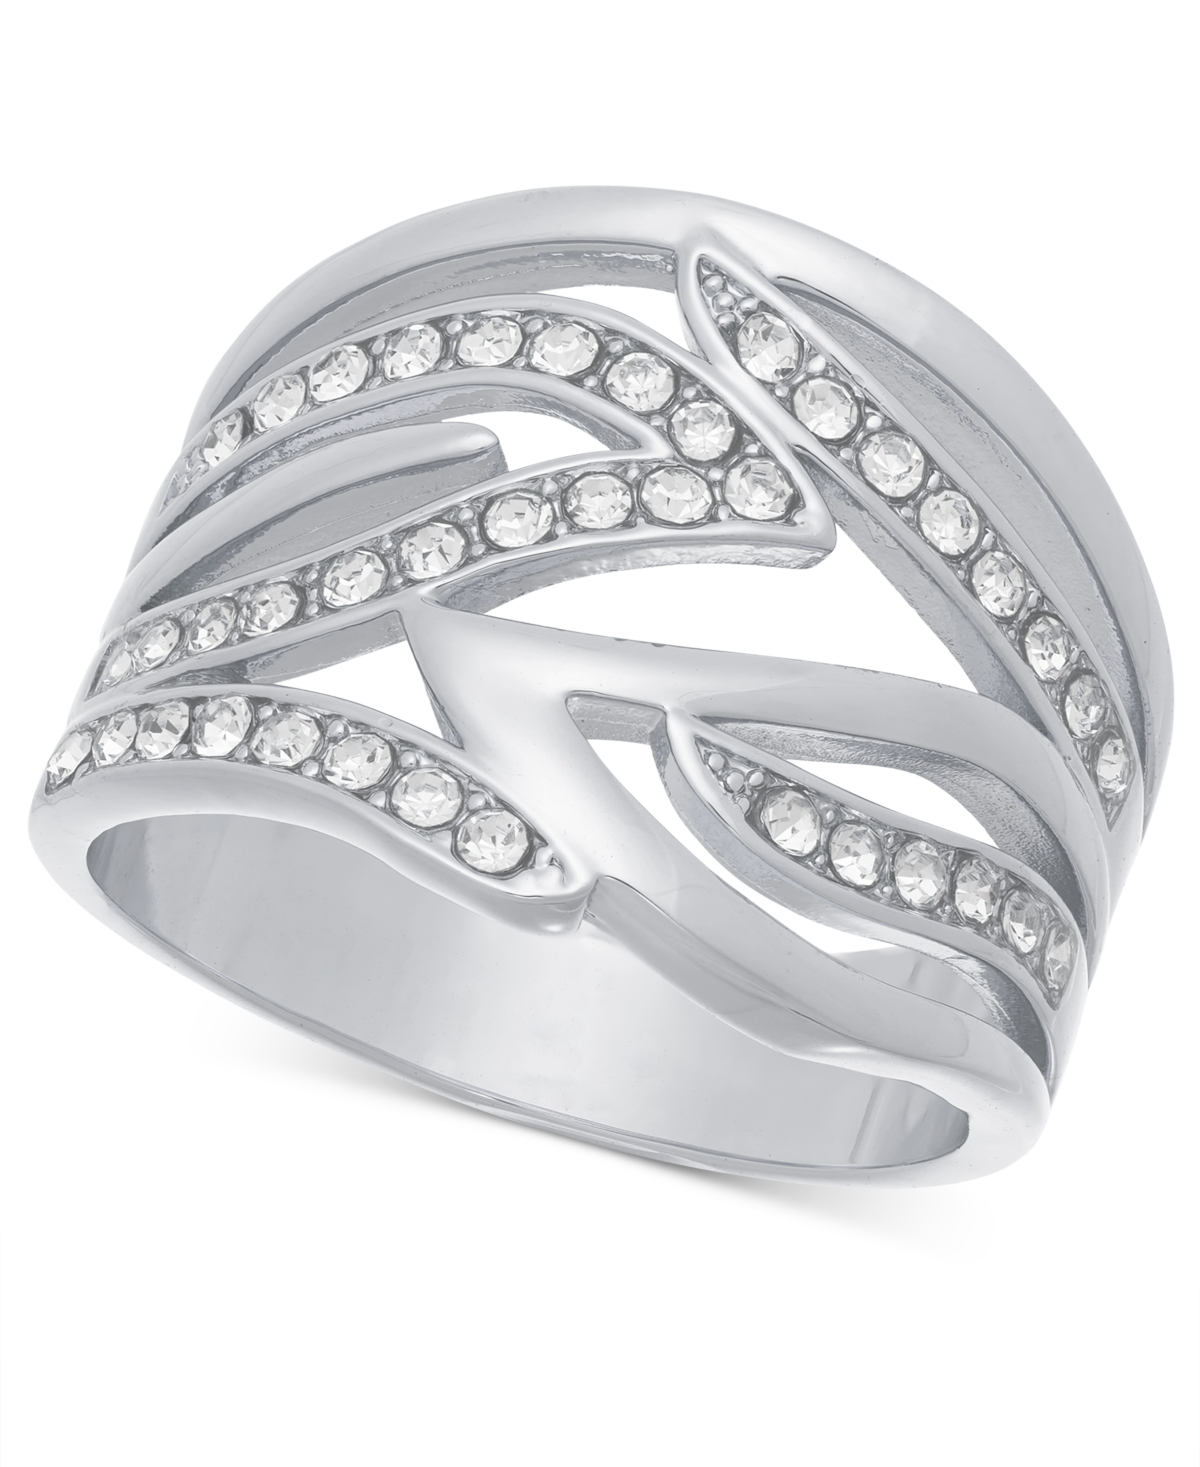 Silver-Tone Pave Flame Ring, Created for Macy's - Silver